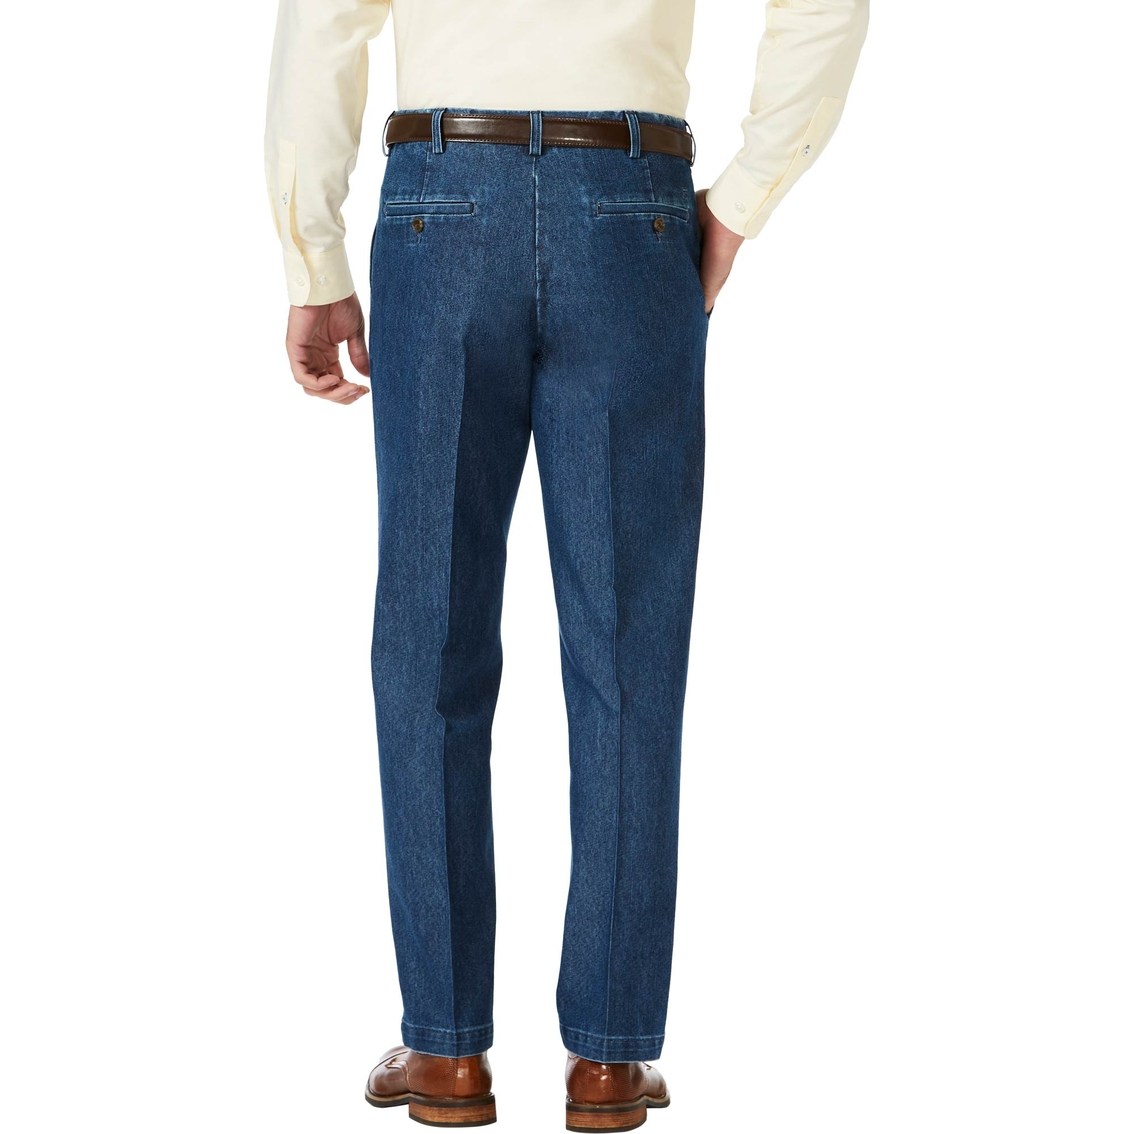 Haggar Stretch Denim Trousers | Pants | Clothing & Accessories | Shop ...